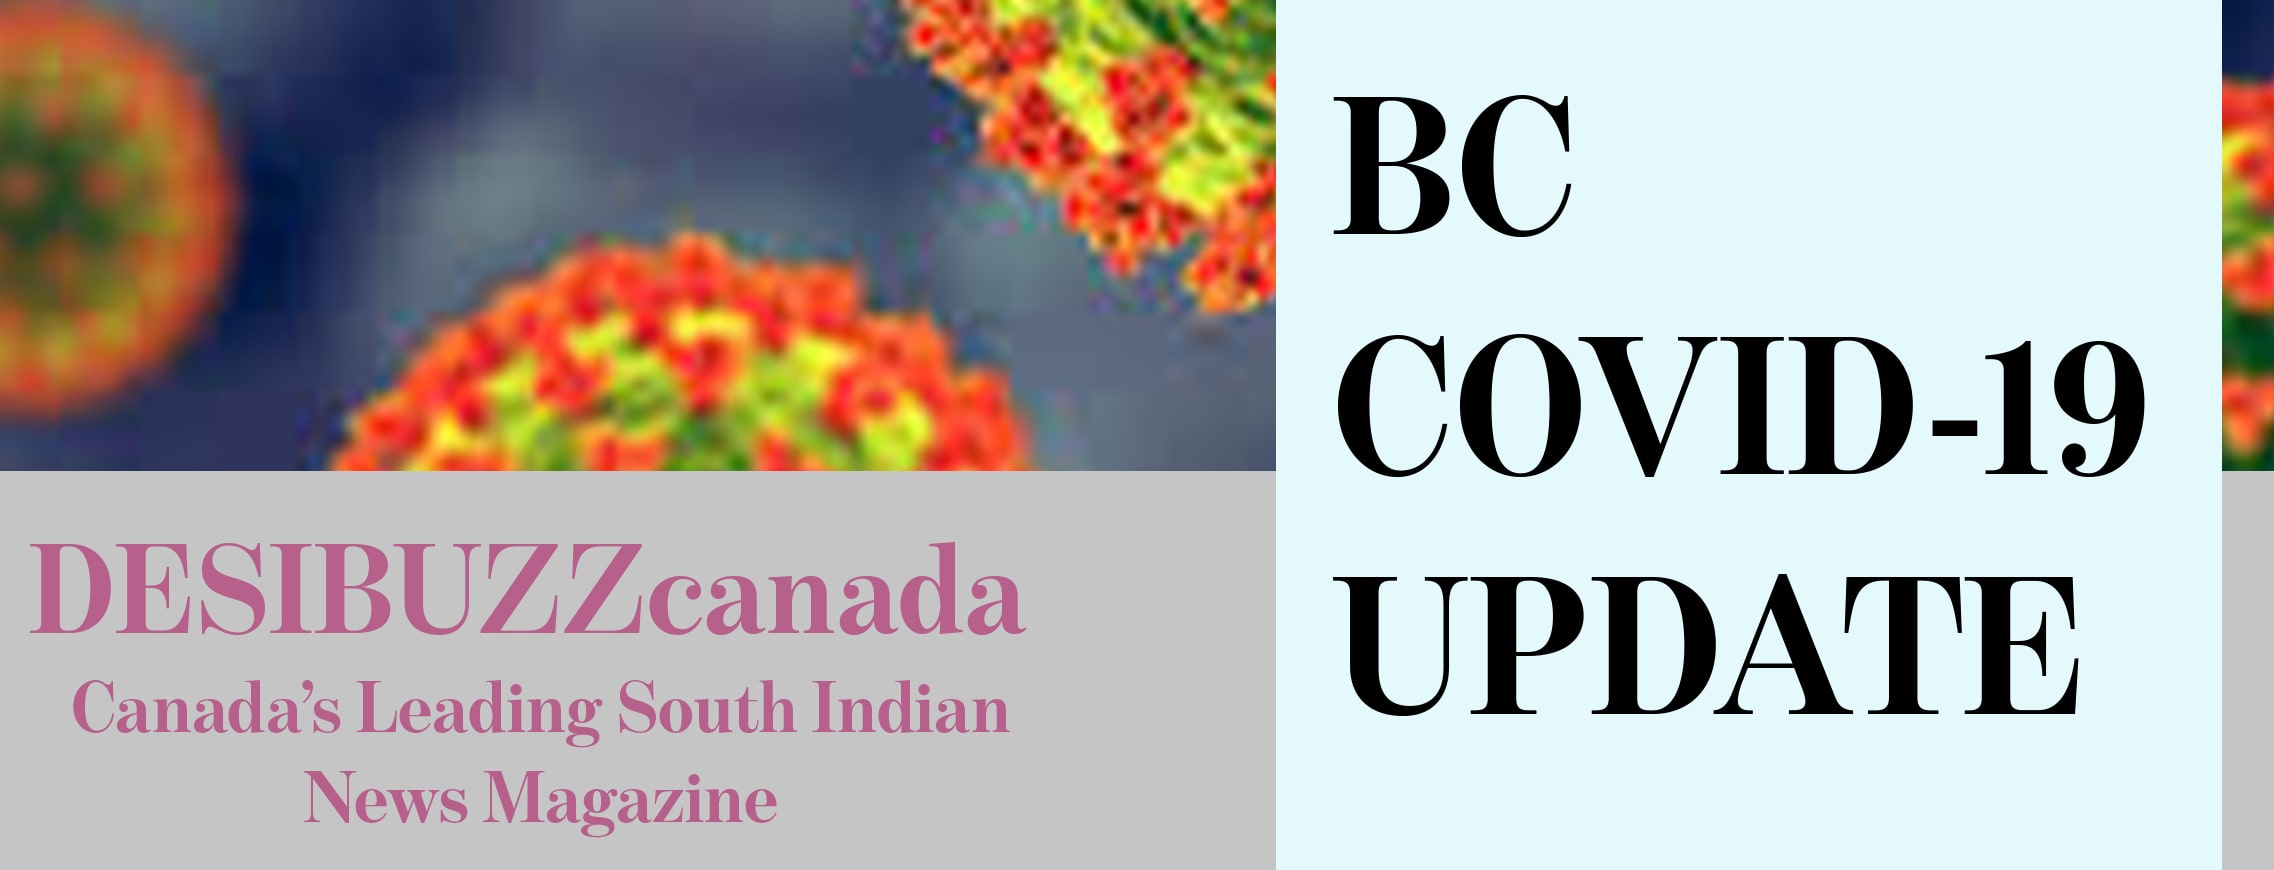 BC COVID-19 DAILY UPDATE: Cases Remain Steady At 800 Plus With Five New Deaths Reported Wednesday